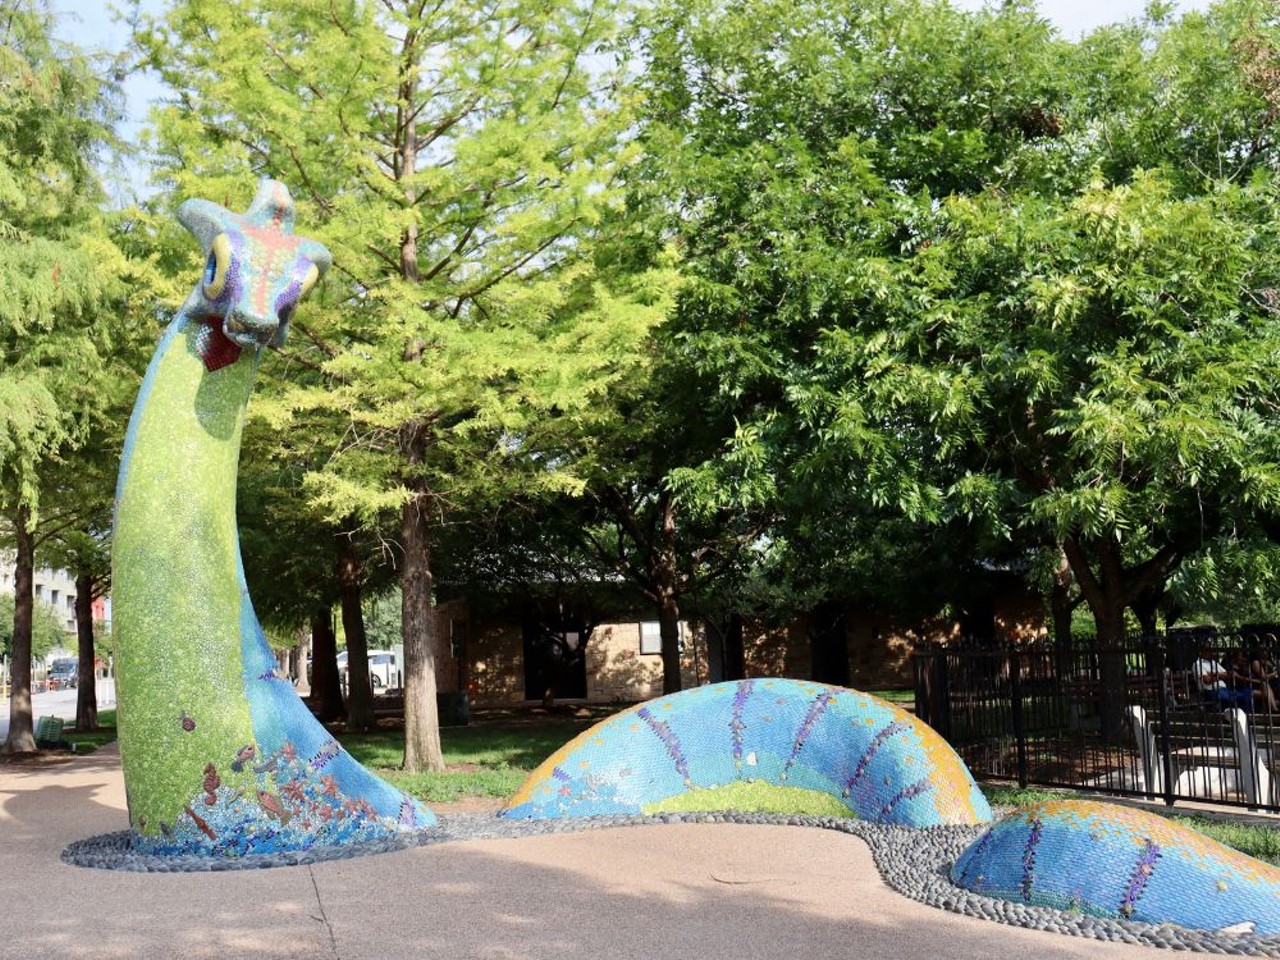 Lake Nessy
4550 Mueller Blvd., Austin
This 16'x30' multicolored sea serpent sits in Austin's Mueller Lake Park across from the Thinkery. The glass and ceramic mosaic monster was created by artist Dixie Friend Gay in collaboration with Blue Genie.